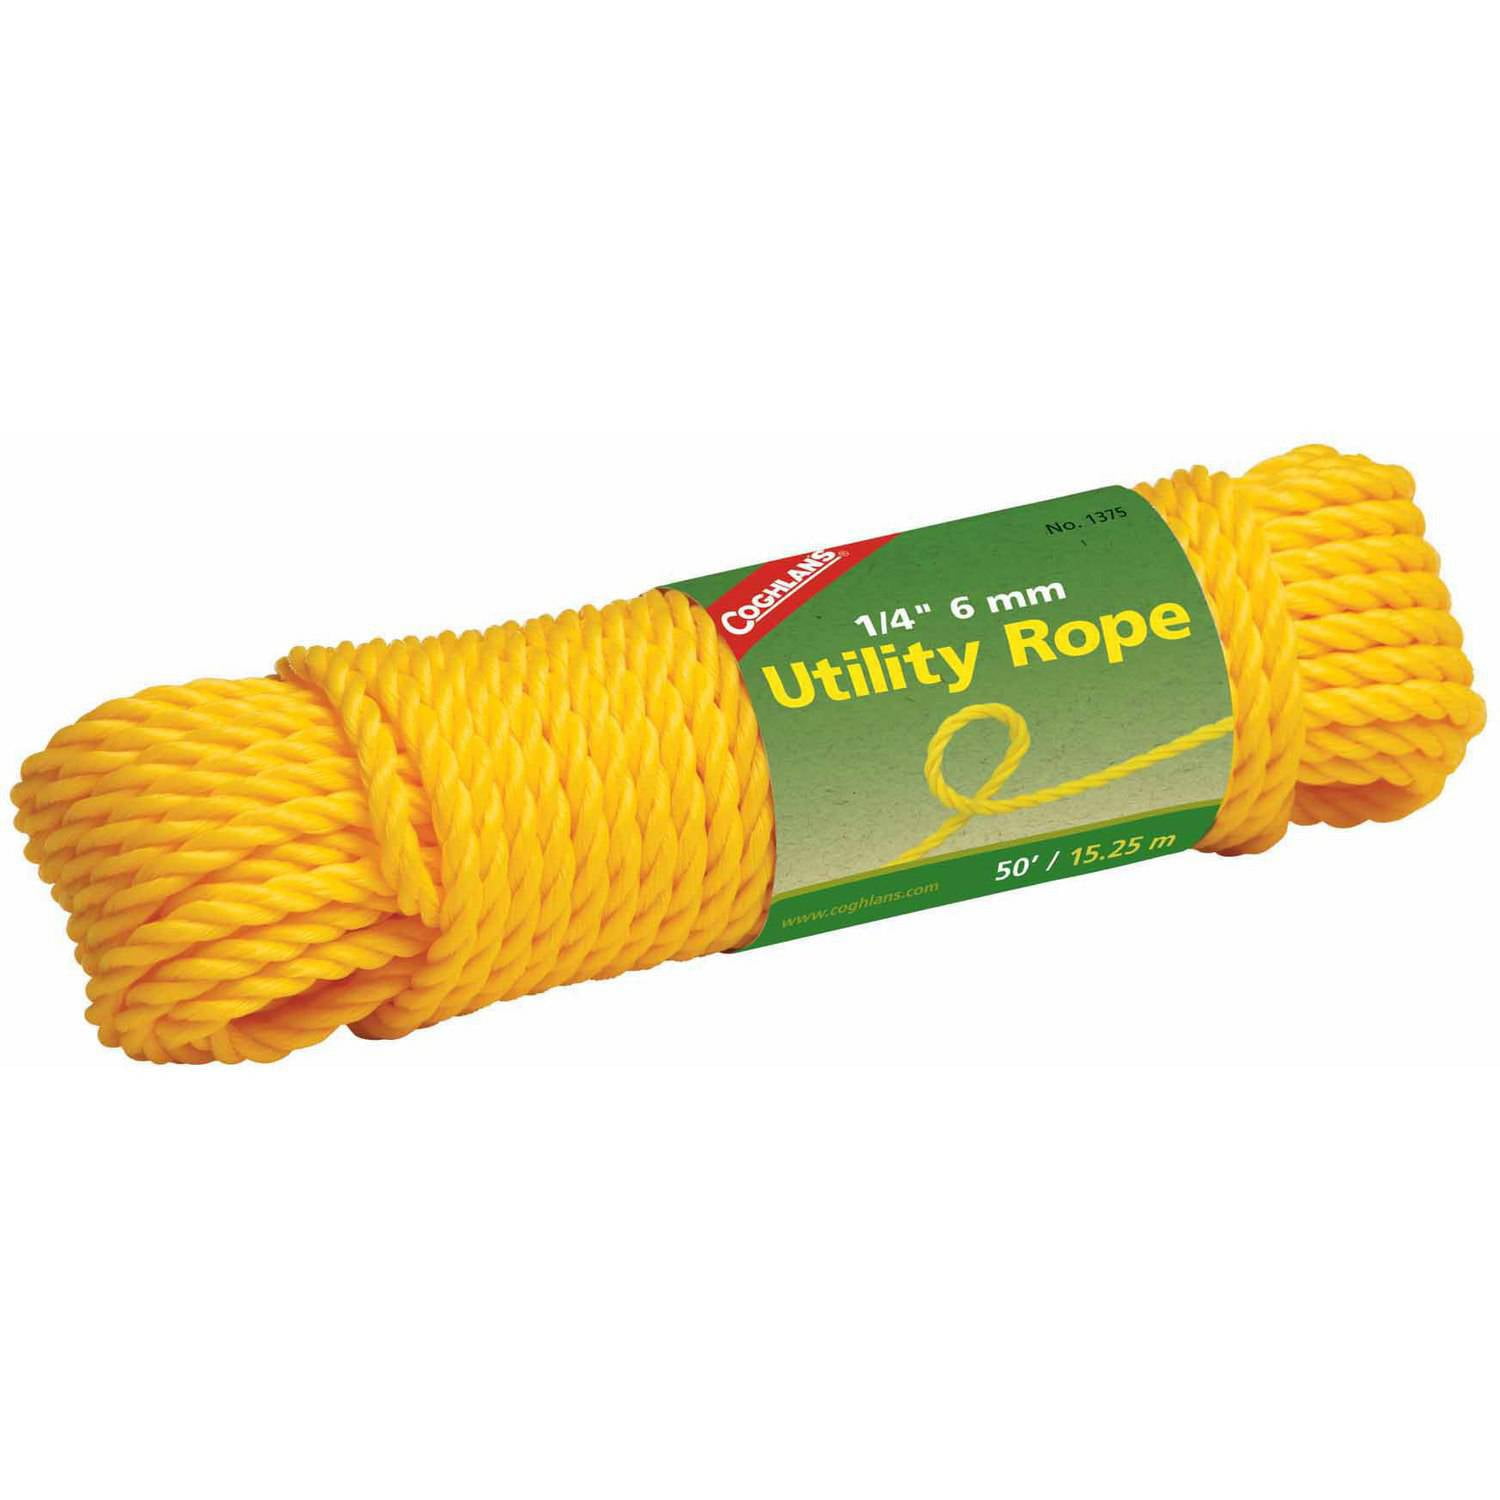 Details about   Summit Utility Rope 4Mm X 25M On Storage 1 Unit Assorted Color 